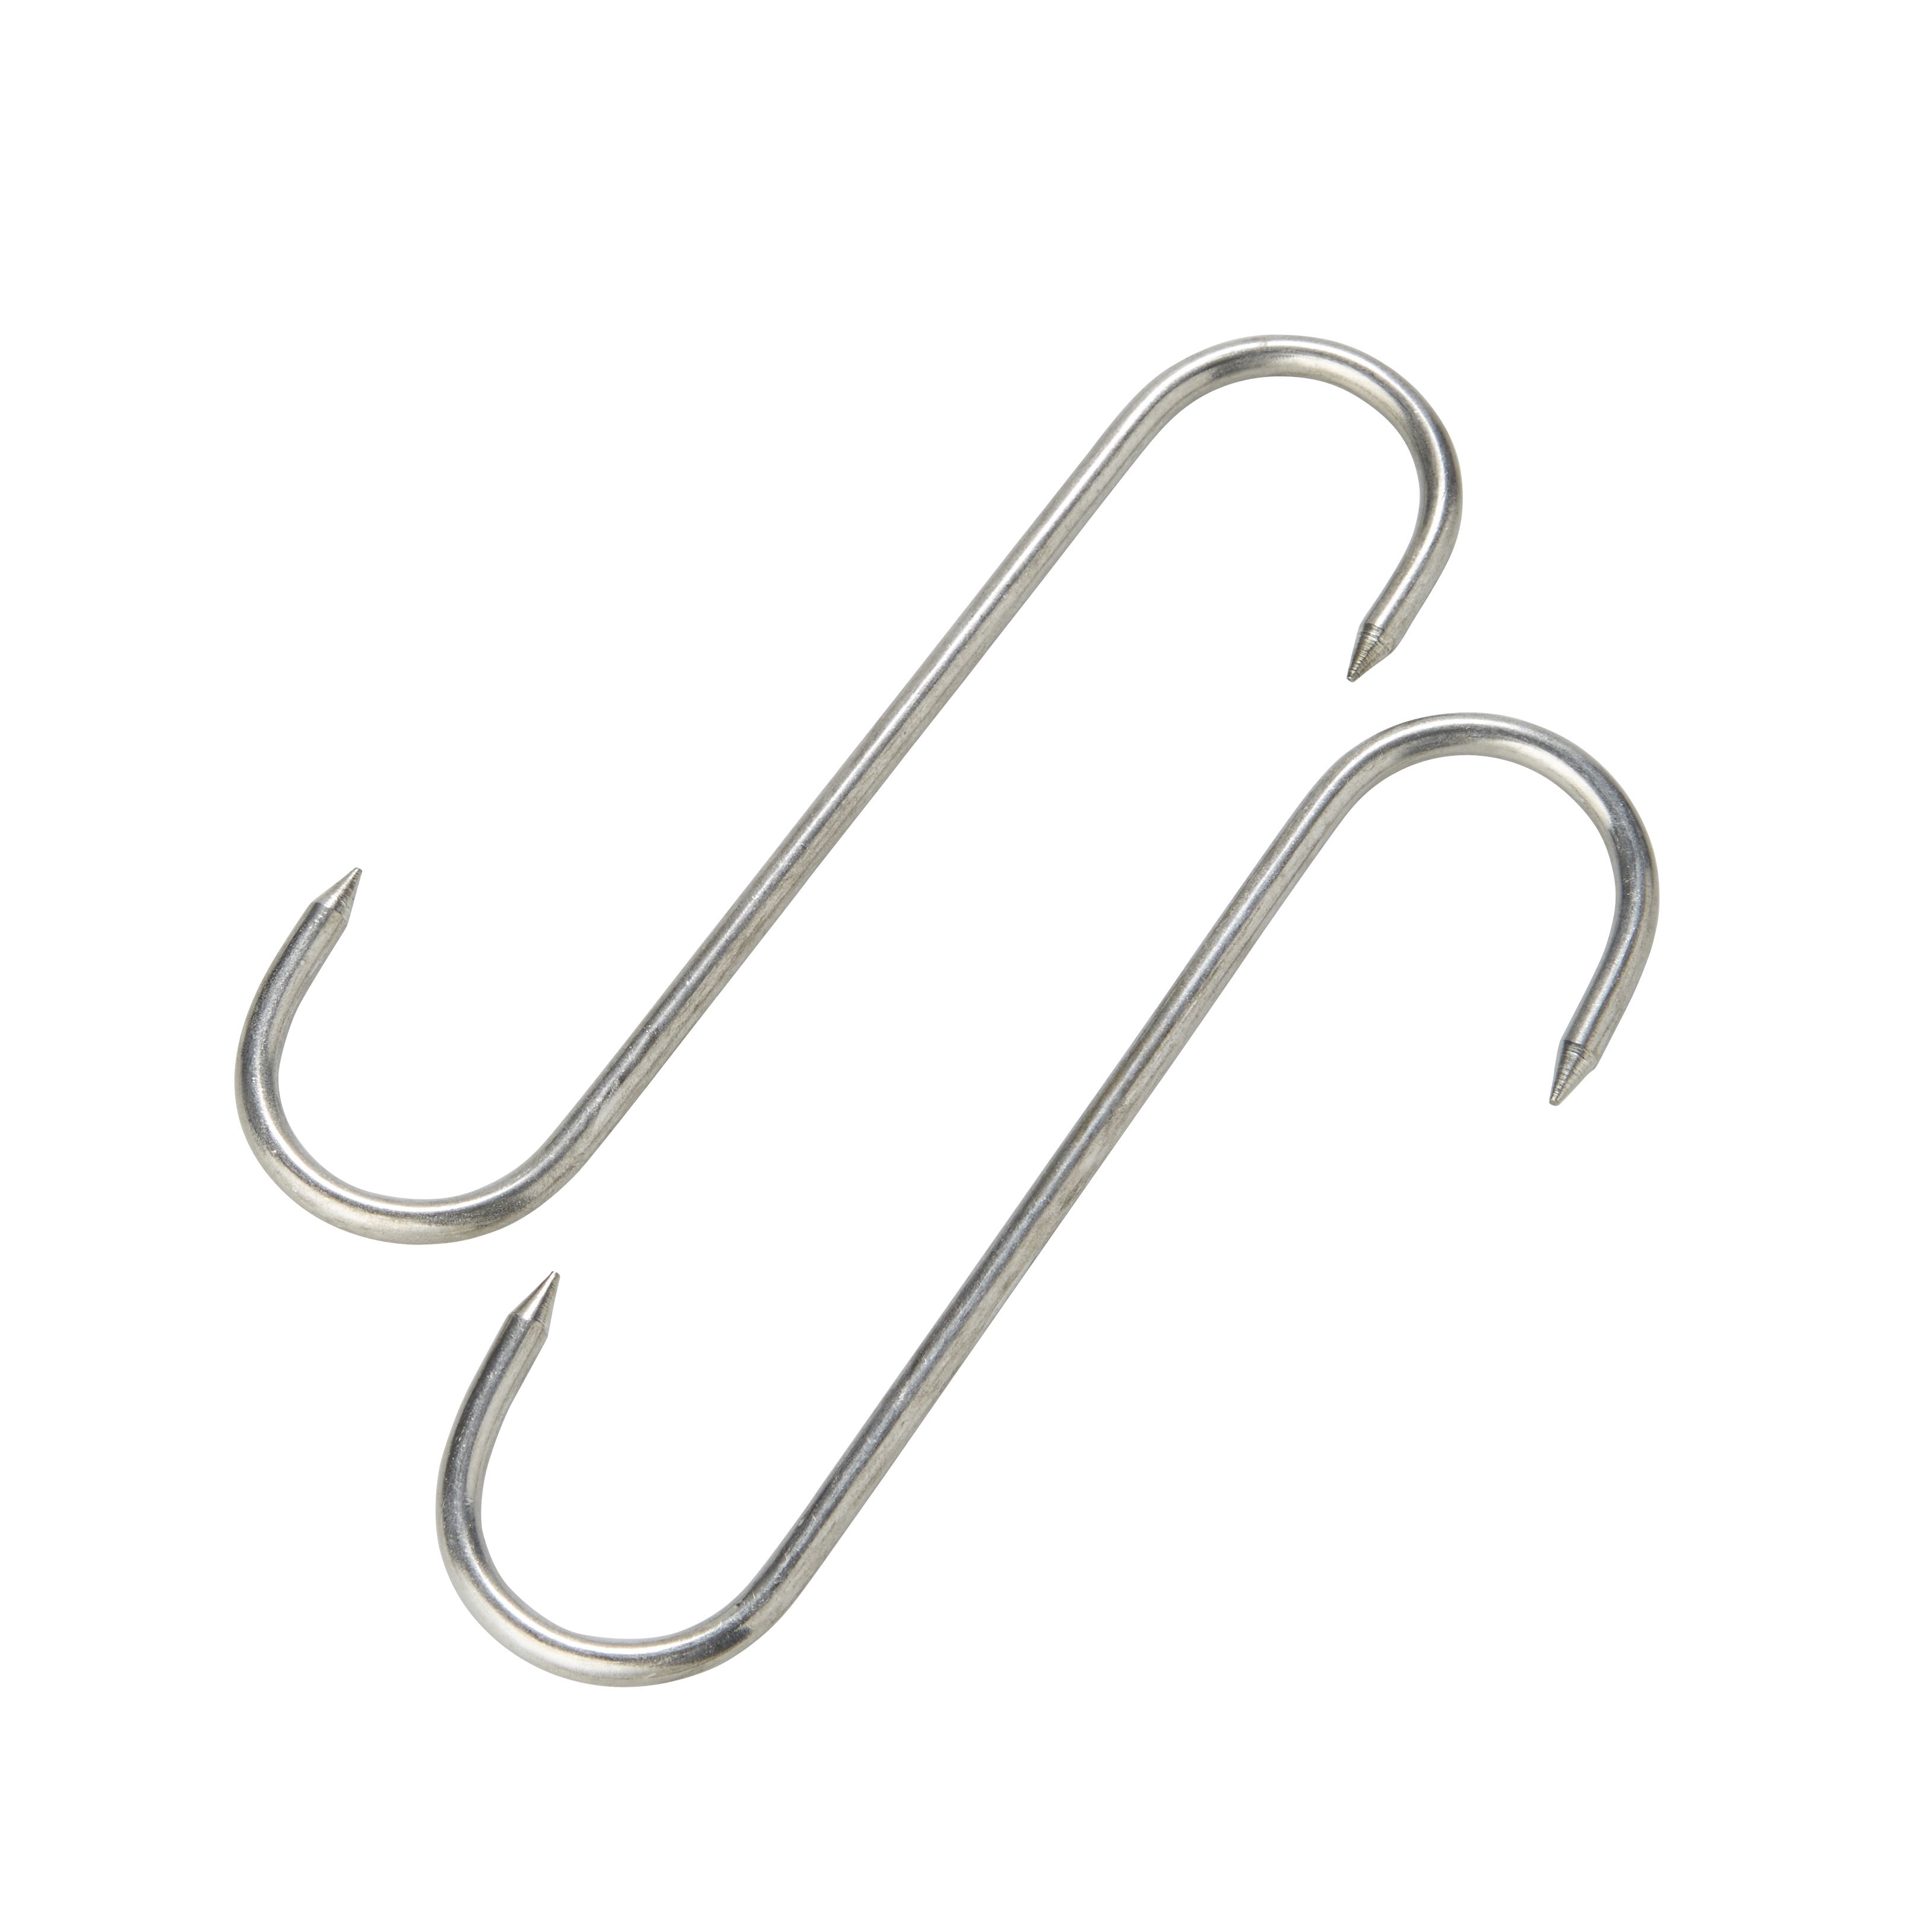 https://kingfisher.scene7.com/is/image/Kingfisher/diall-stainless-steel-s-hook-pack-of-2~3663602920809_01bq?$MOB_PREV$&$width=618&$height=618